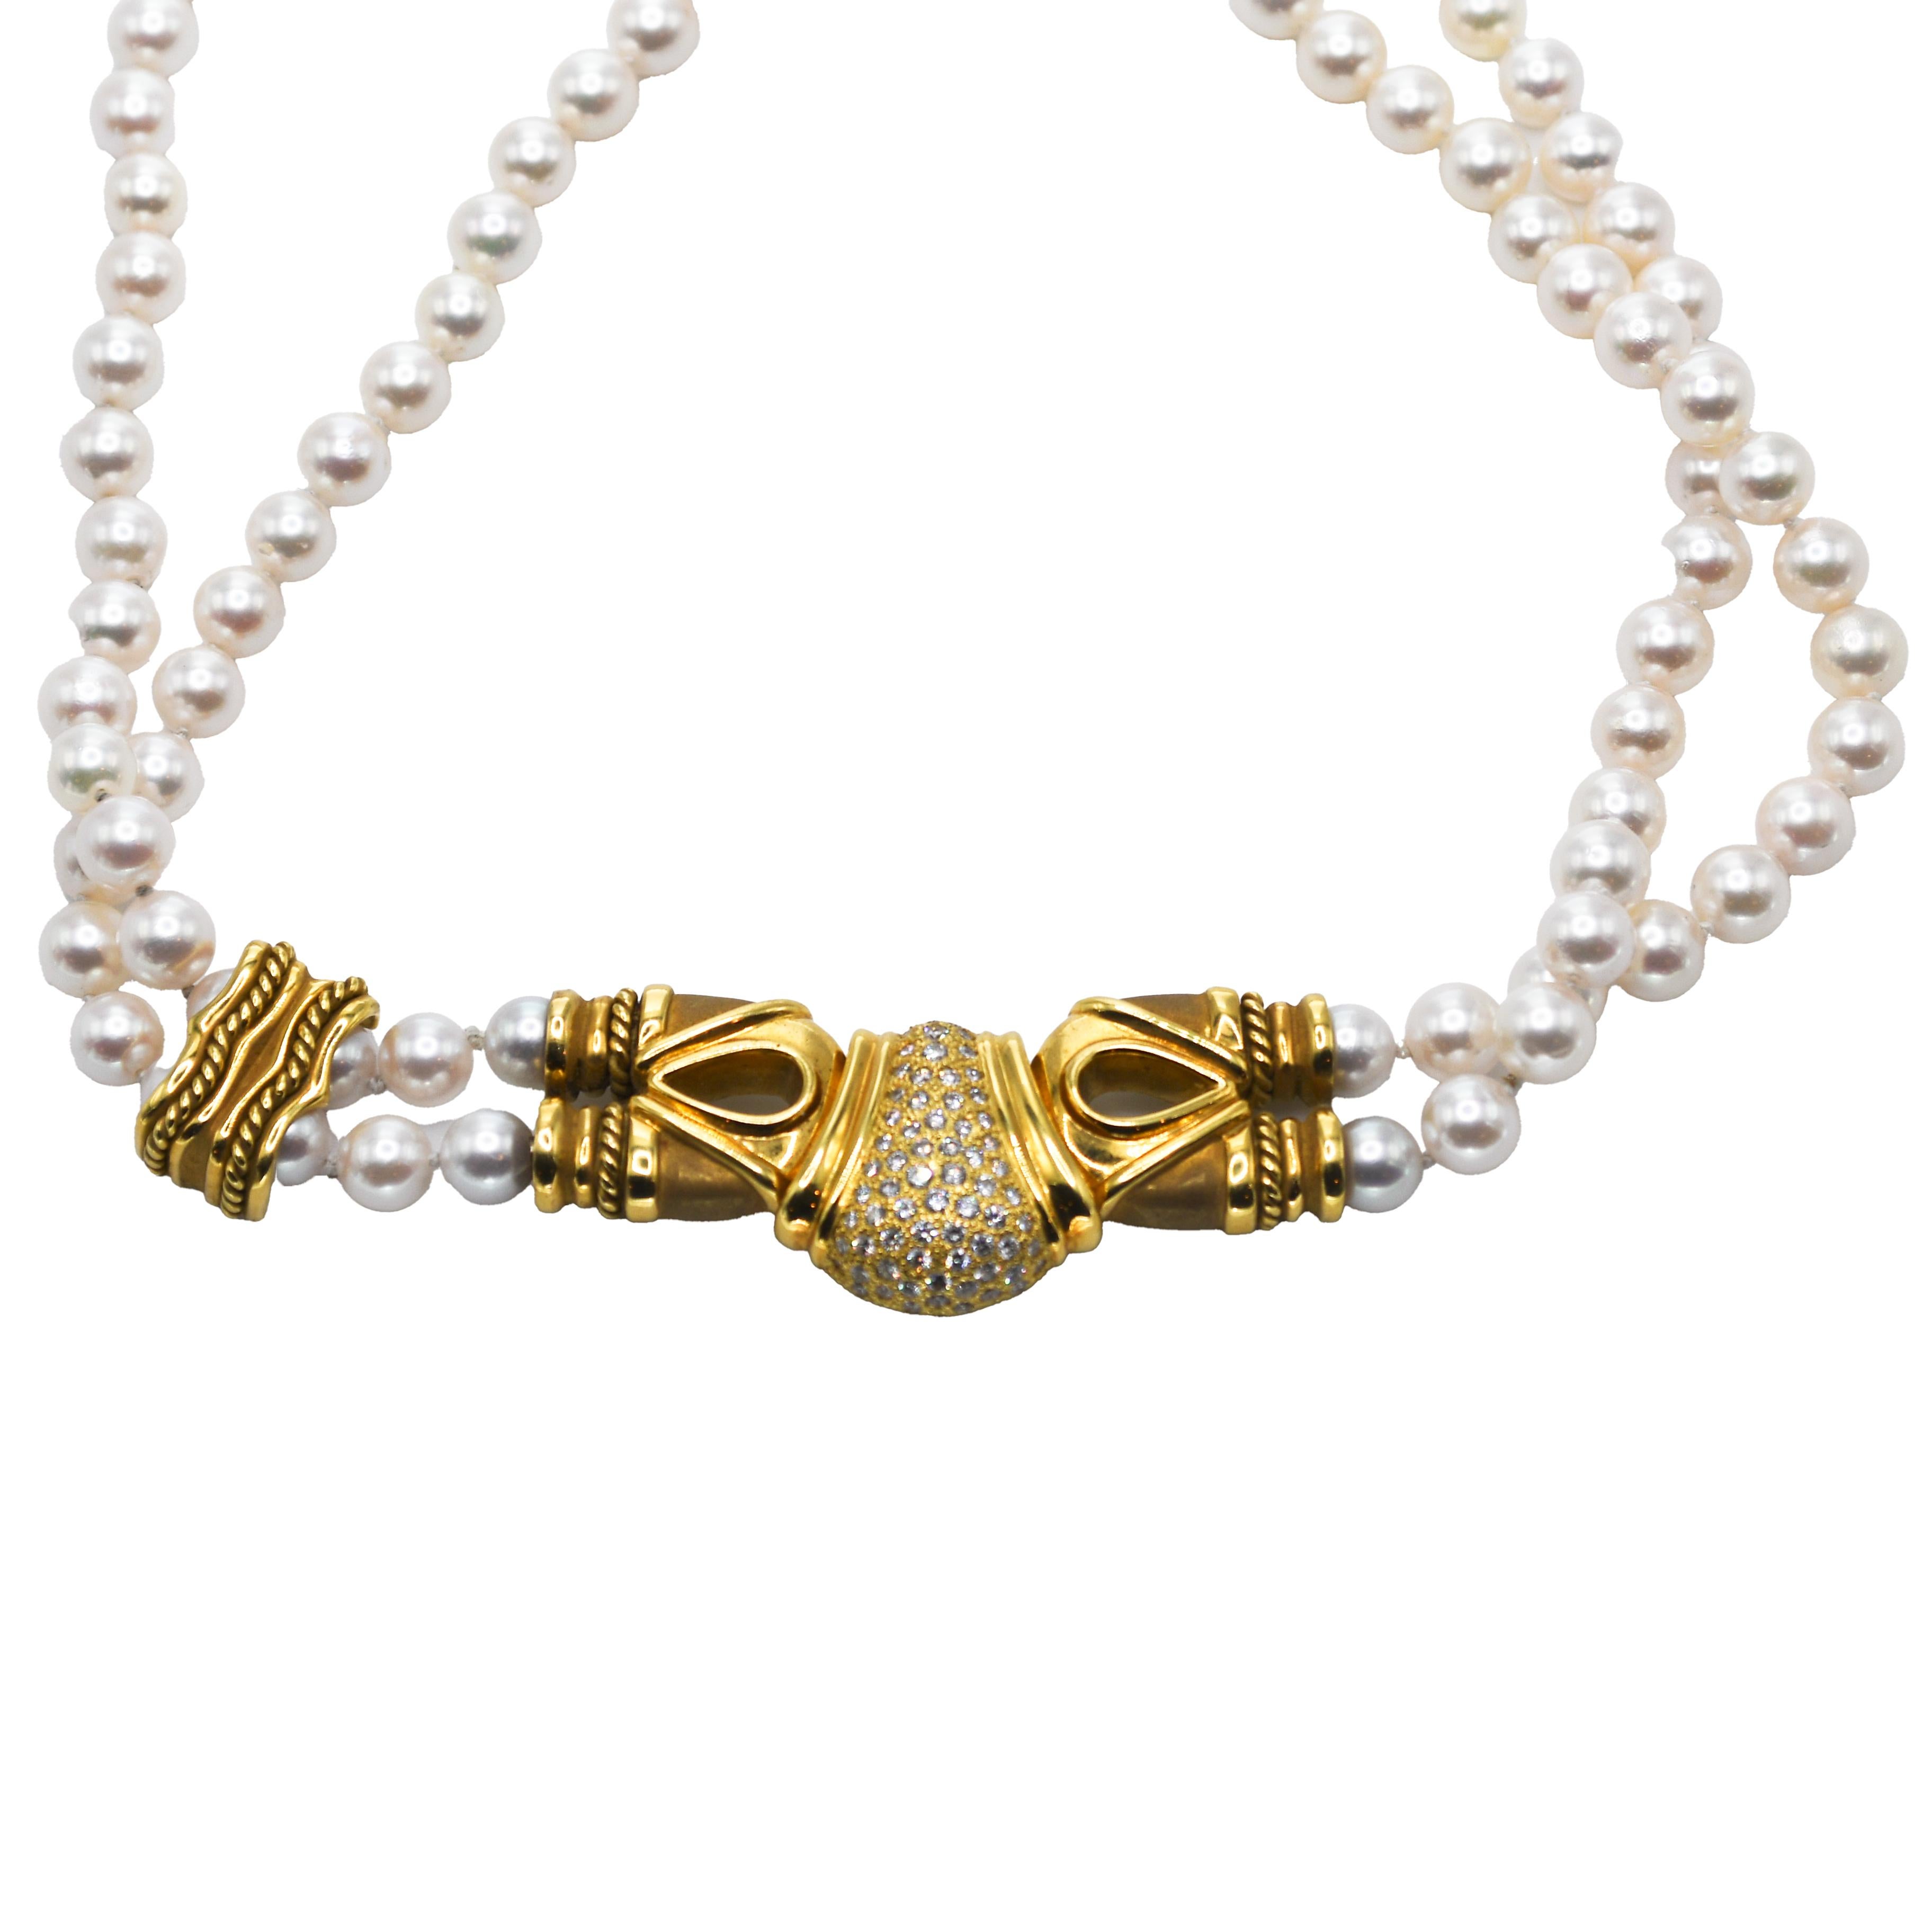 Ladies' custom-made 18k yellow gold and pearl necklace with diamonds.
Stampded 18k and weighs 94.3 grams gross weight, 54 grams of 18k gold without the pearls.
The pendant/clasp is set with round brilliant cut diamonds, 1.00 total carats, G to H